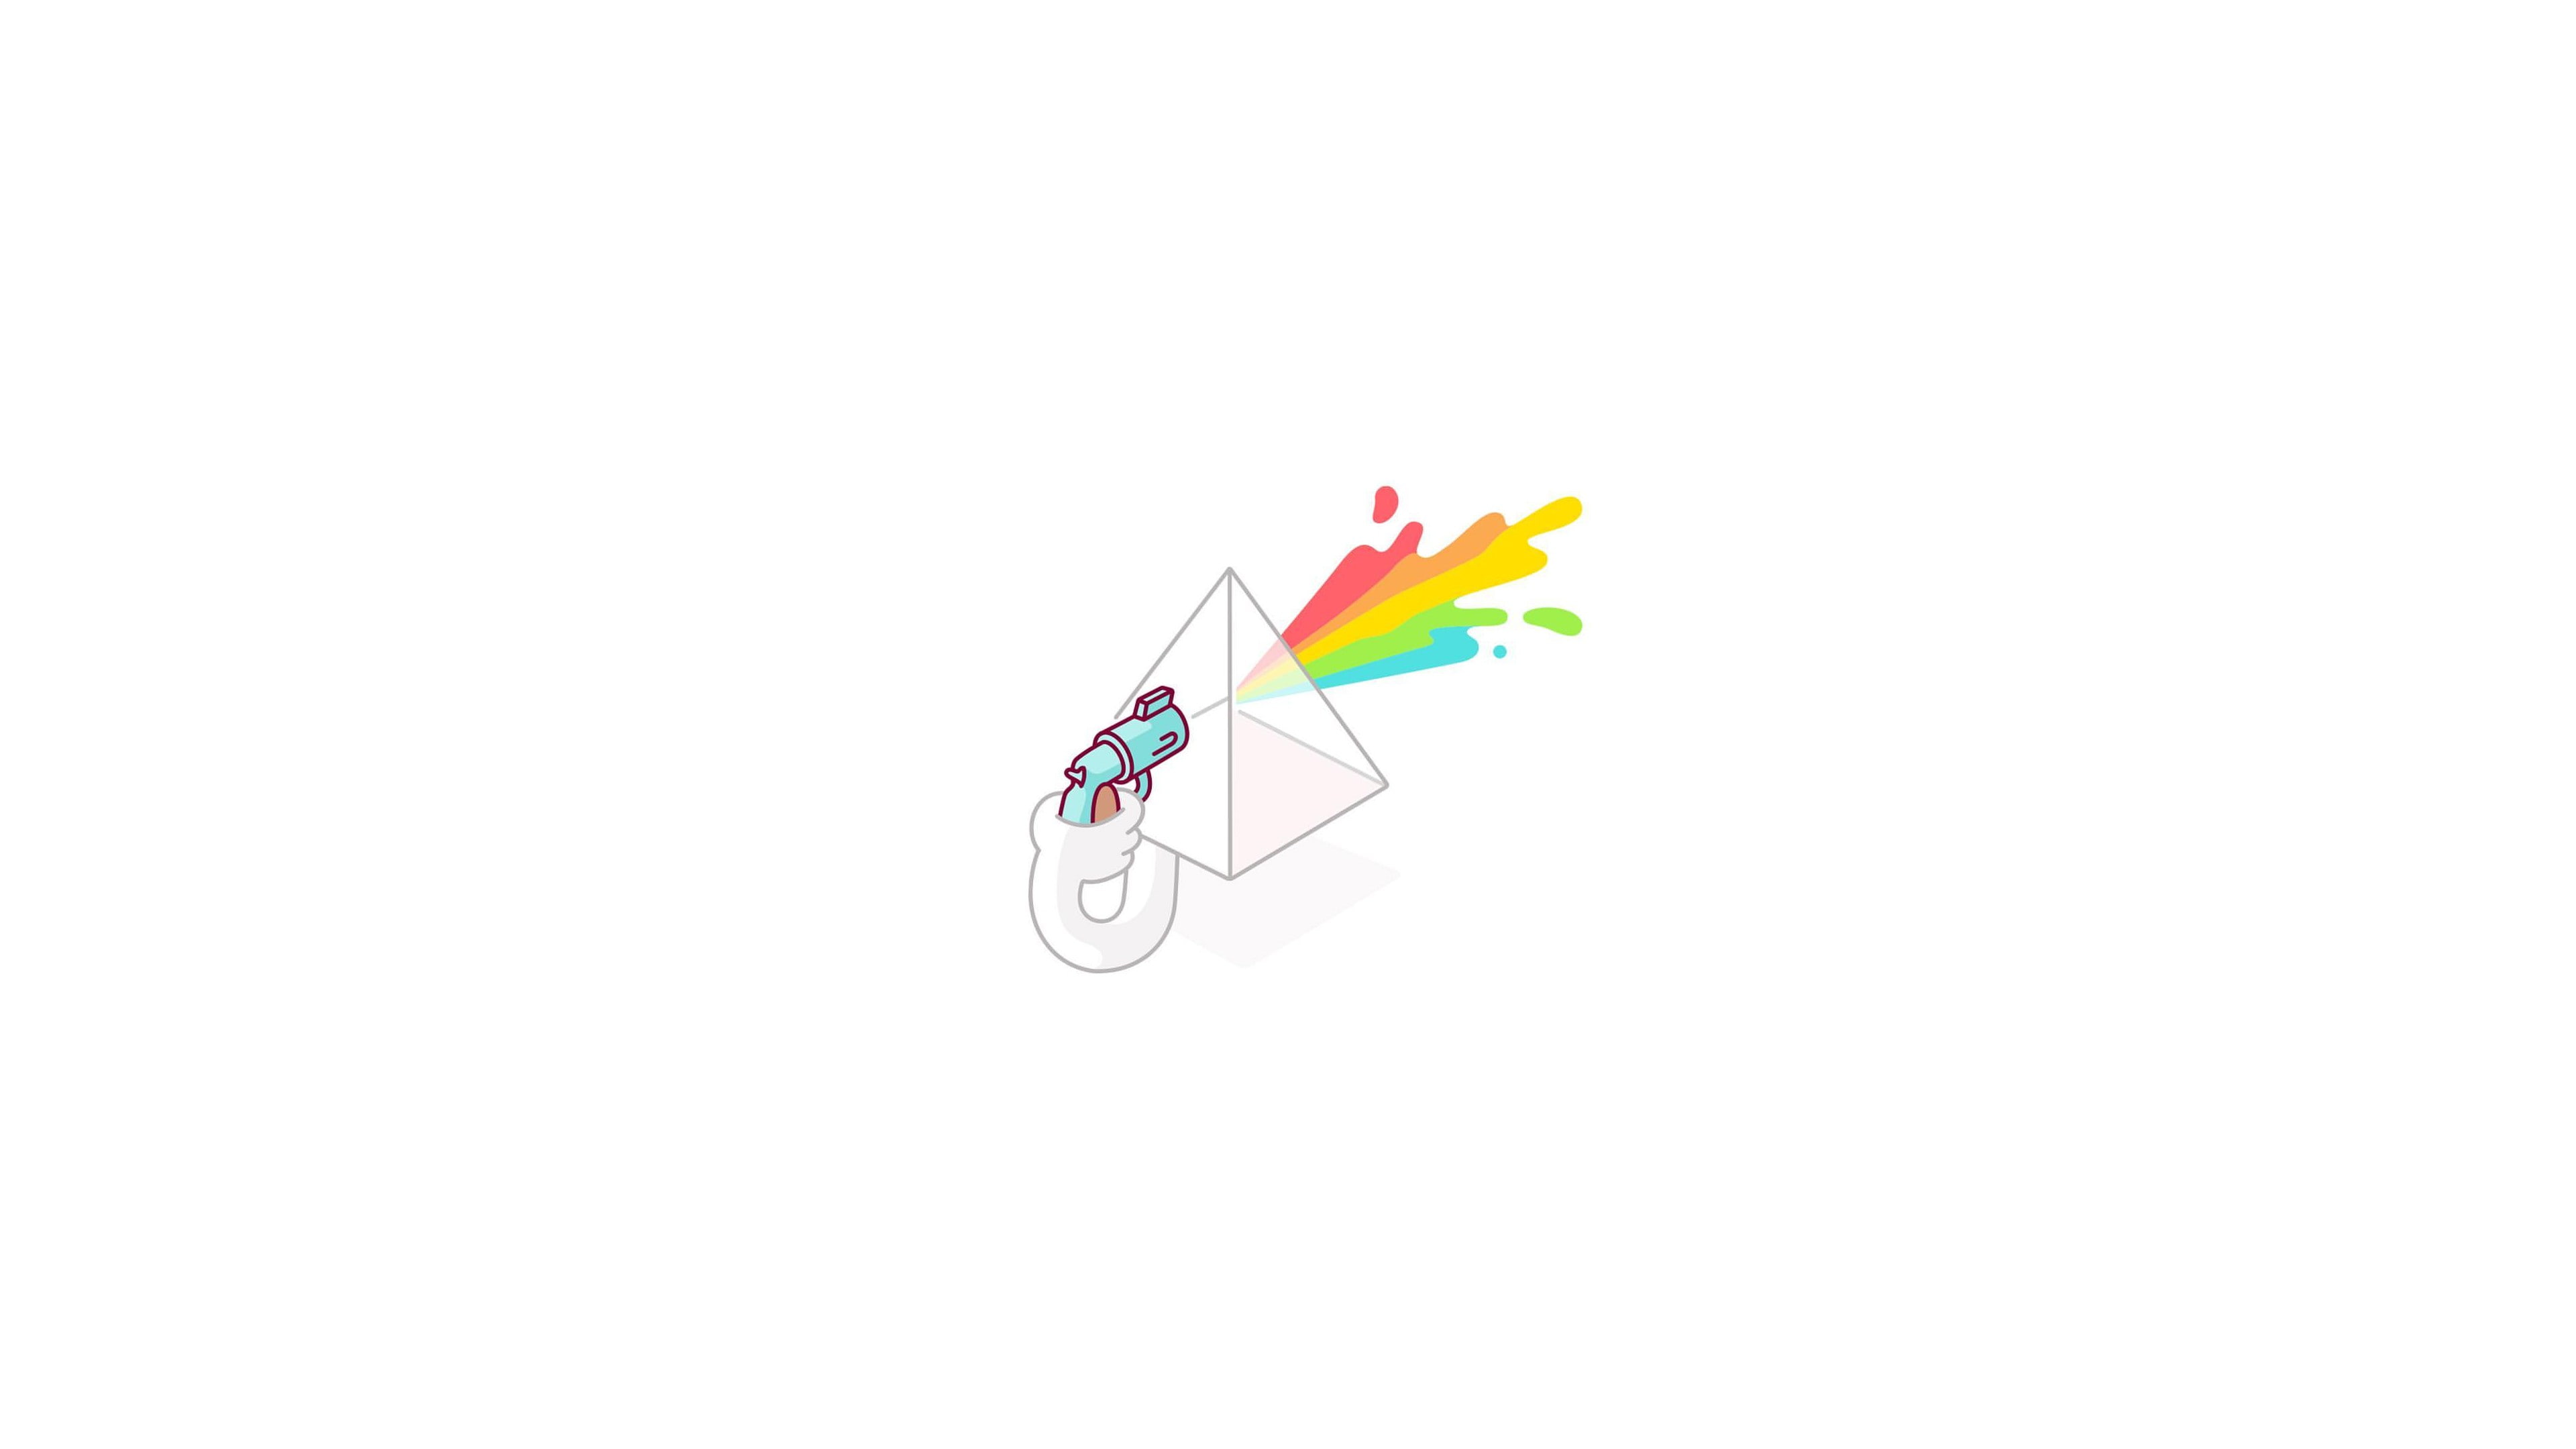 white background, colorful, pyramid, water guns, illustration